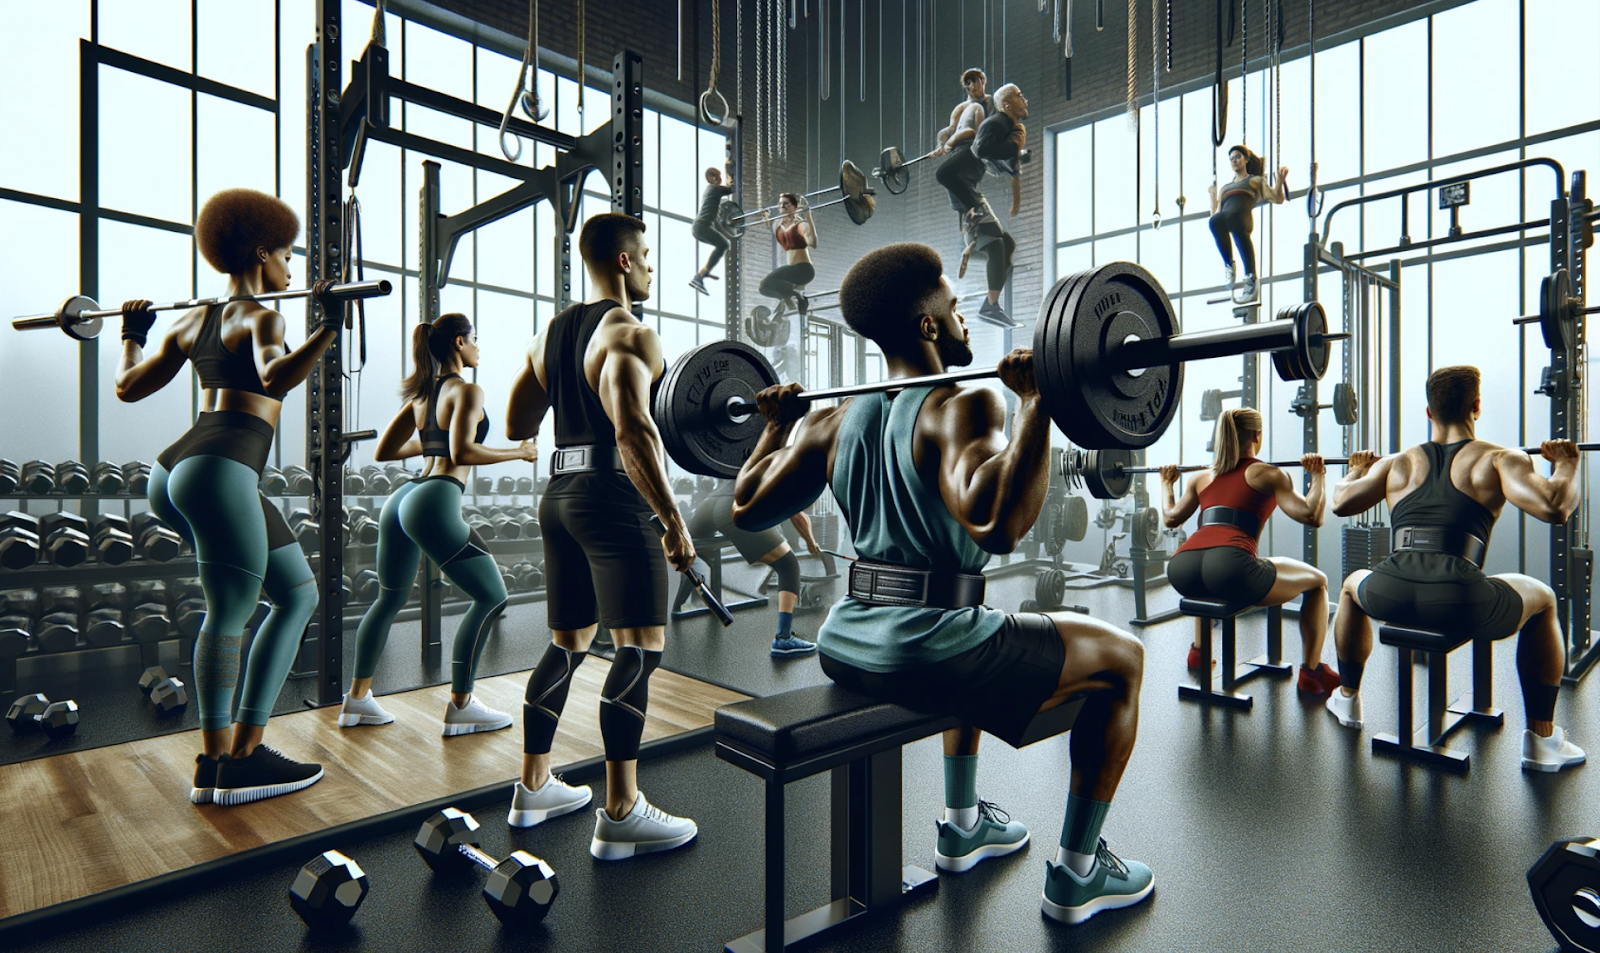 AI image of people working out in a gym